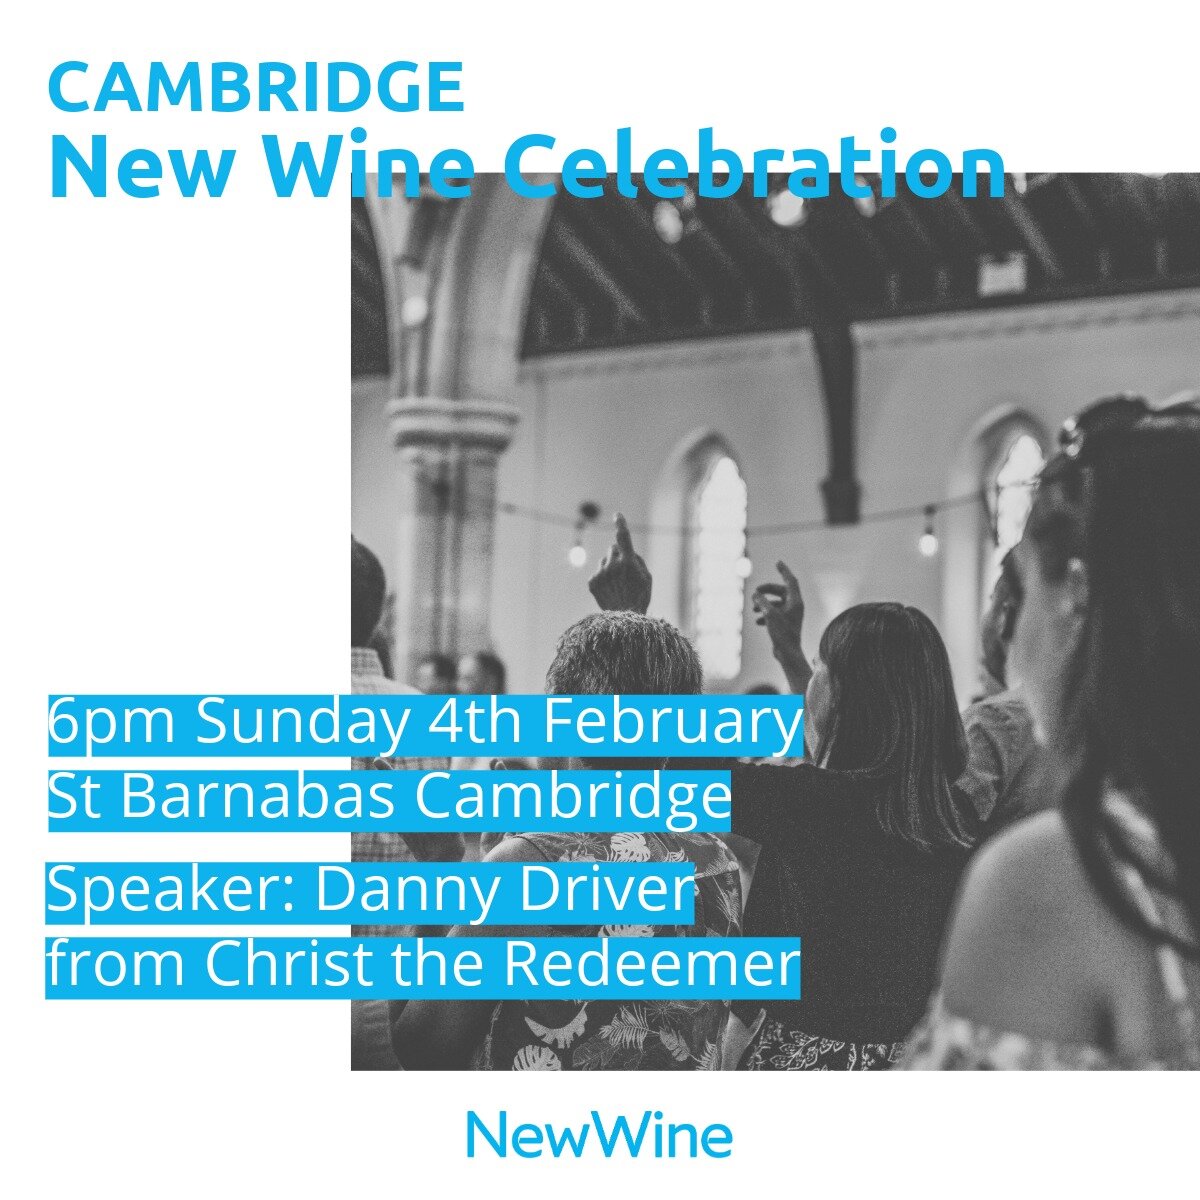 Join us for our Cambridge New Wine Celebration!

This will be a great opportunity to gather with churches across the network to worship together, hear God's word and prayer for one another. 

We'll be serving coffee beforehand from 5.30pm as well as 